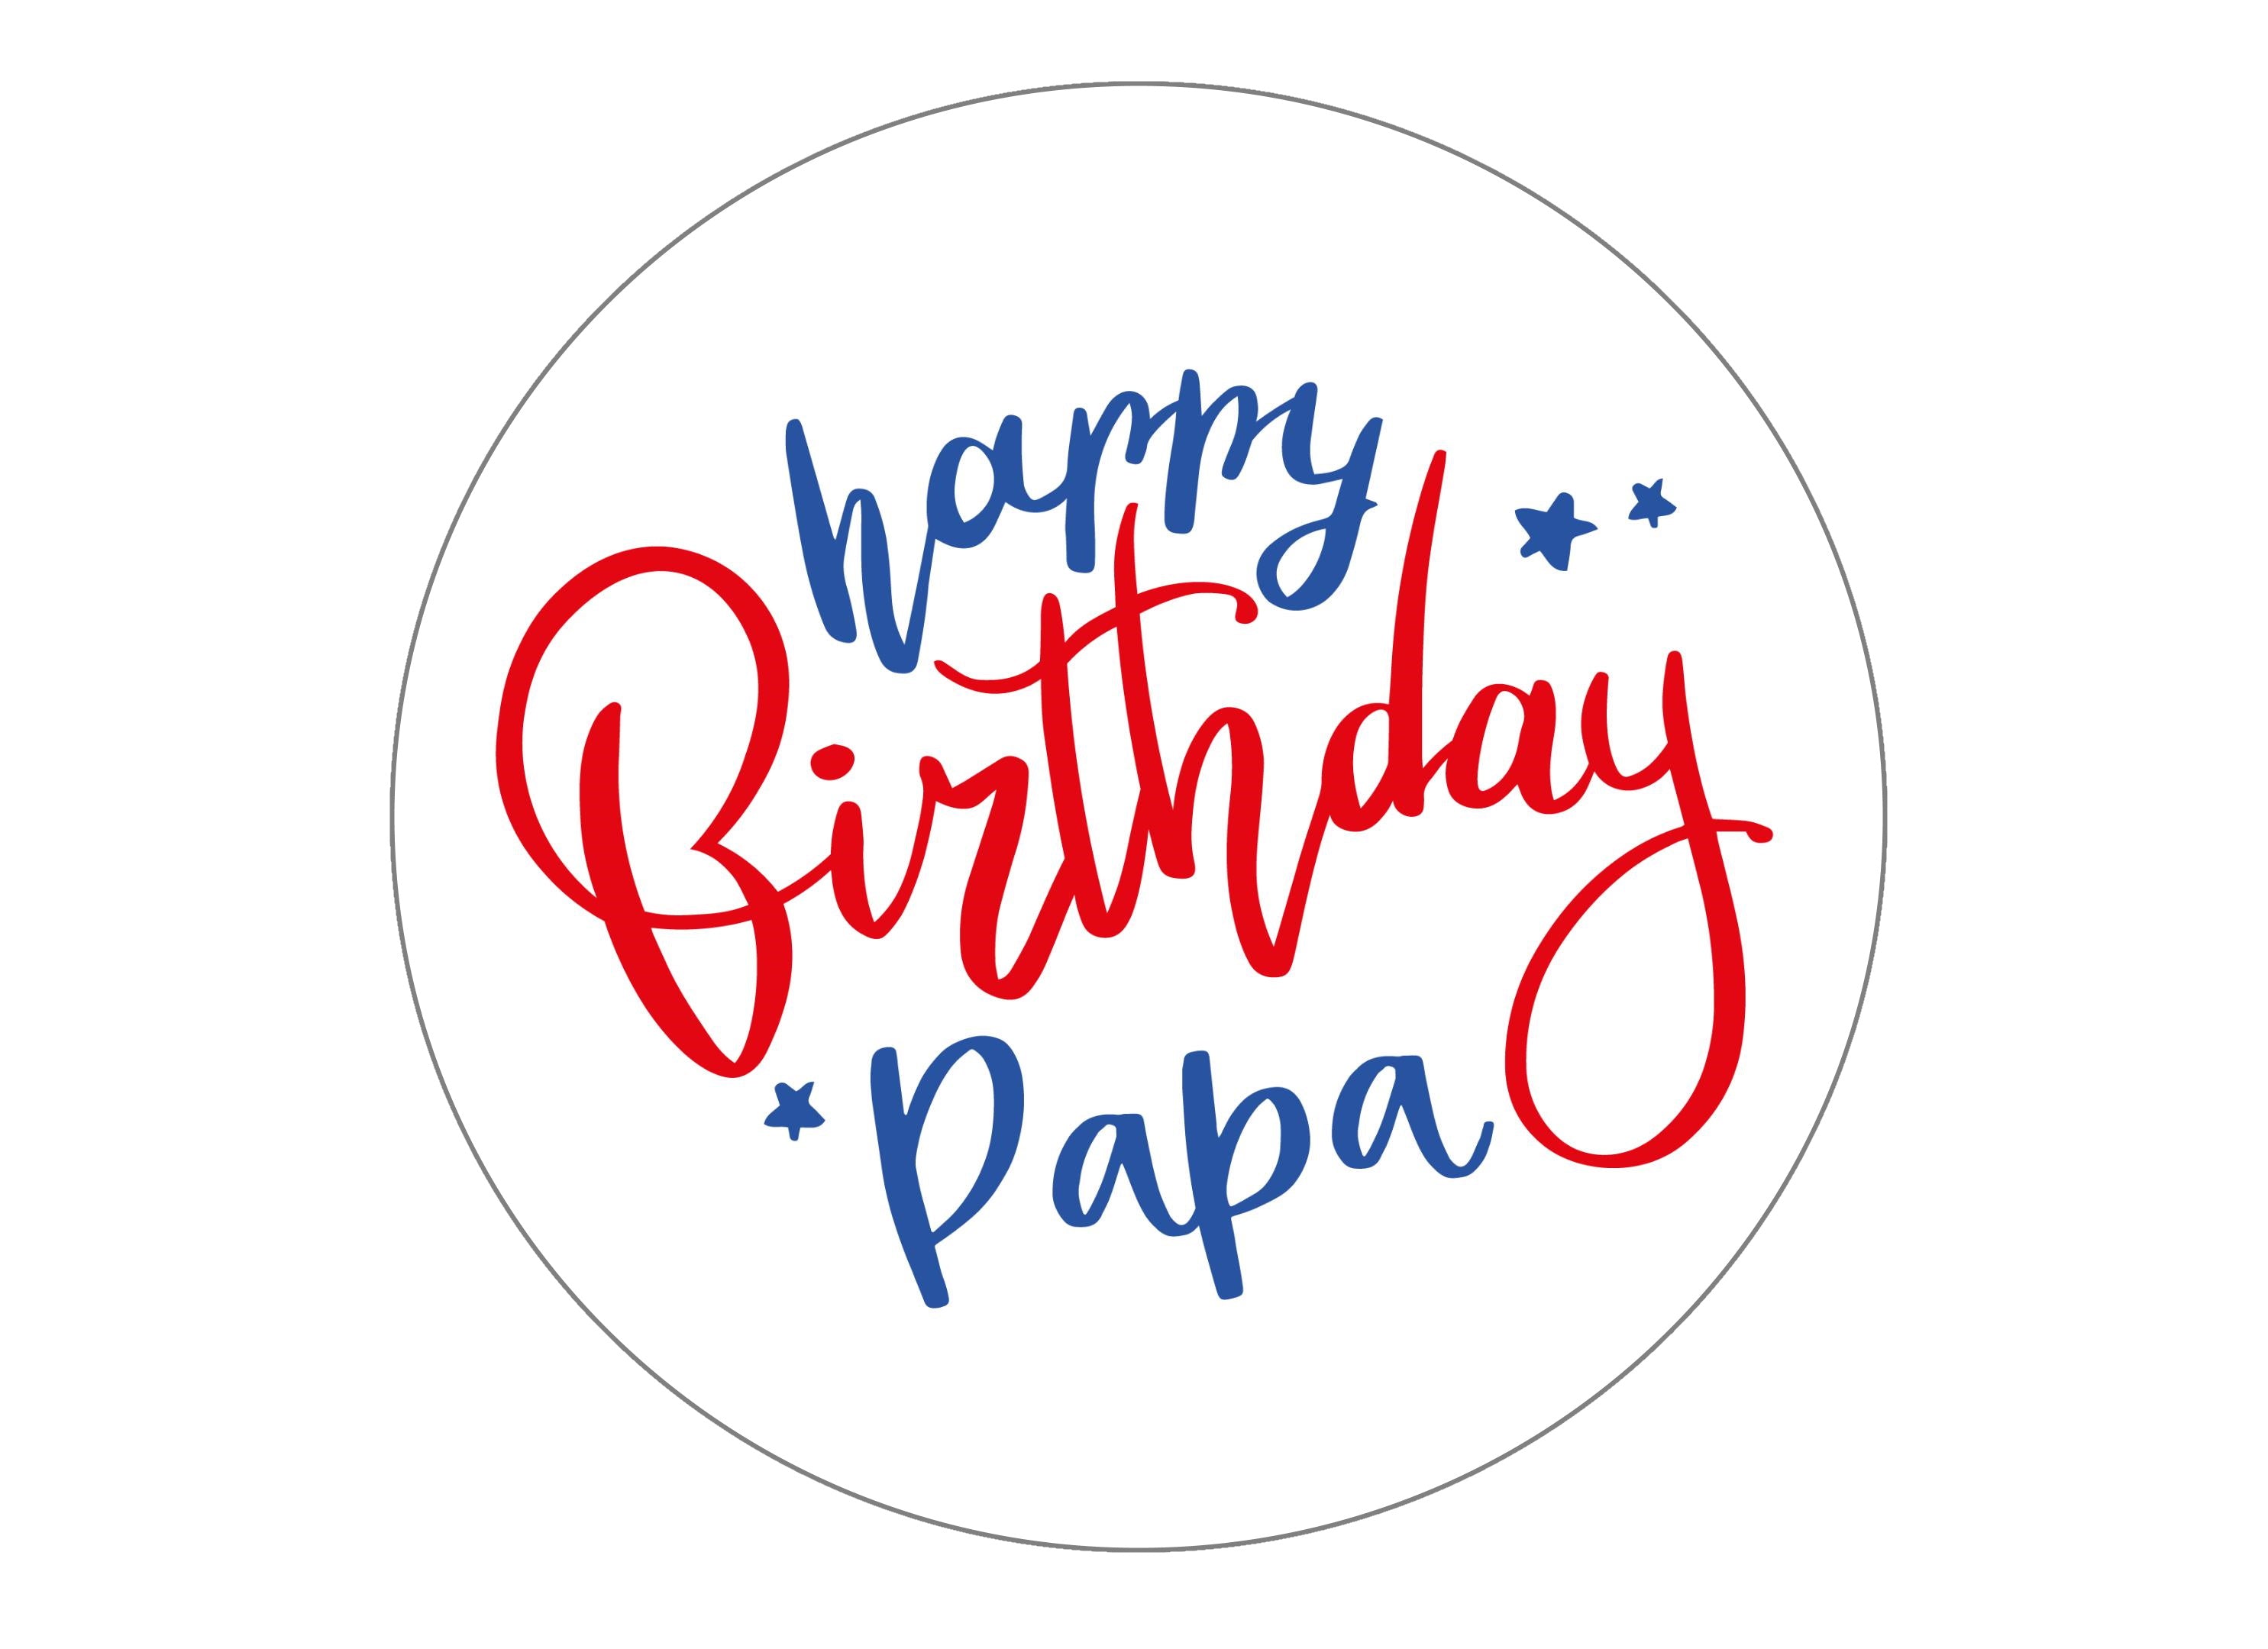 Large 7.5" round cake topper with Happy Birthday Papa messages